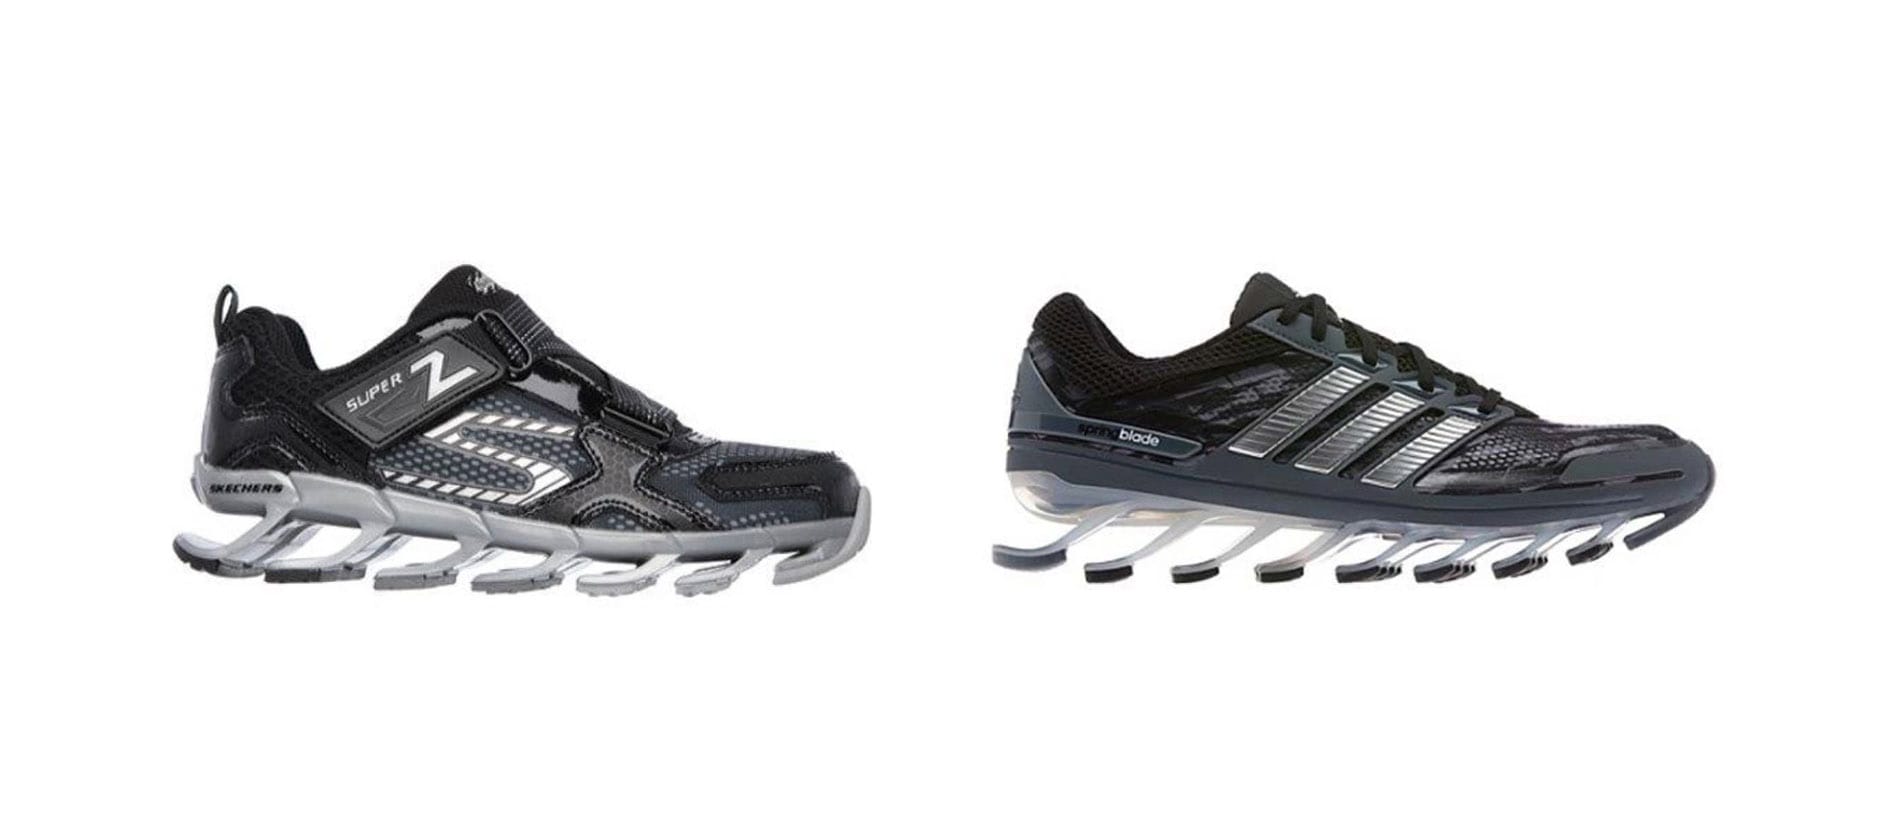 how do skechers fit compared to adidas